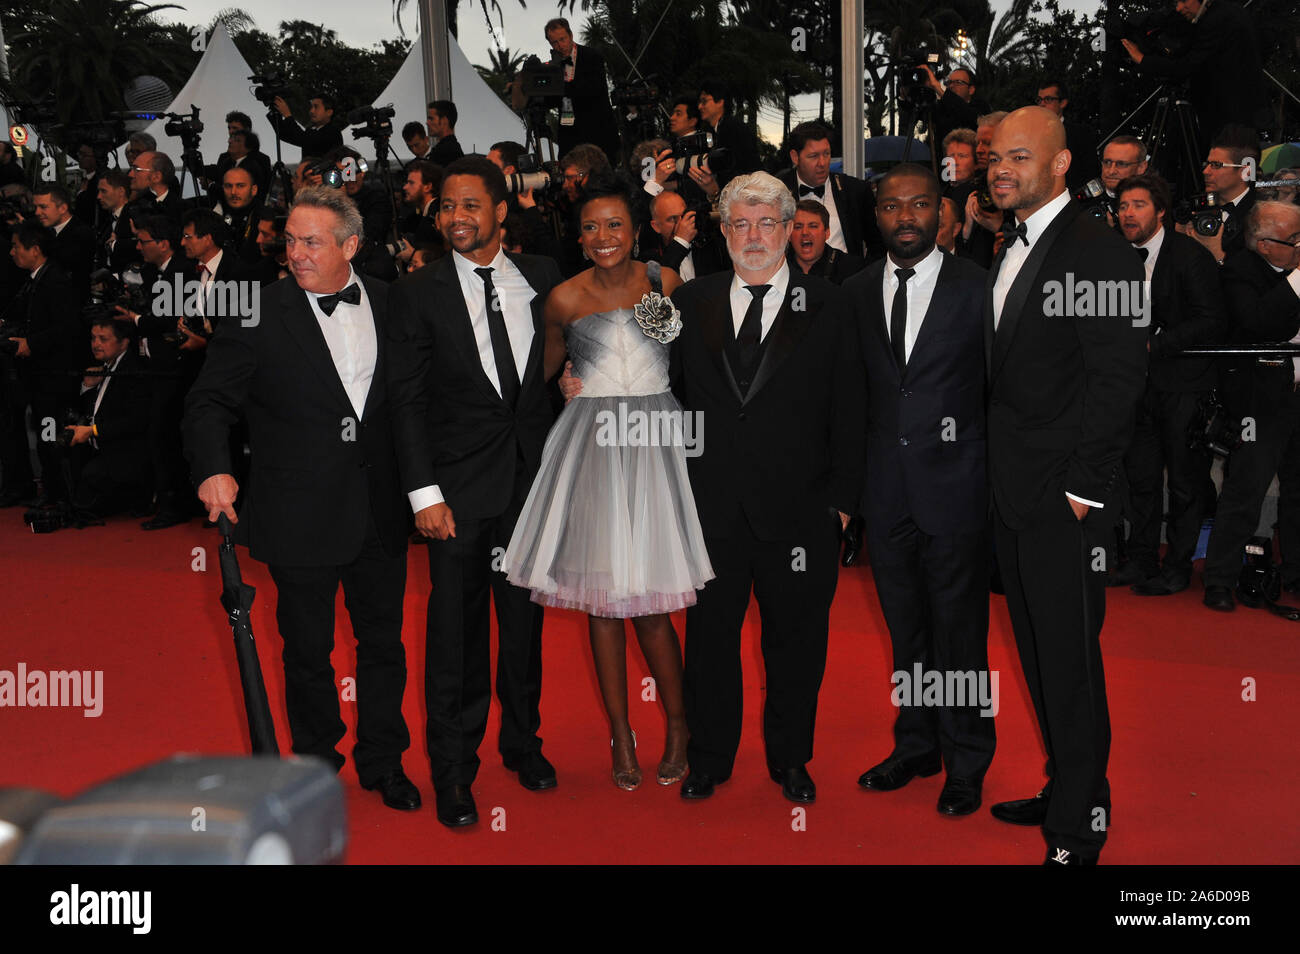 CANNES, FRANCE. May 25, 2012: Anthony Hemingway, David Oyelowo, George Lucas, Mellody Hobson & Cuba Gooding Jr. at the gala screening of 'Cosmopolis' in competition at the 65th Festival de Cannes. © 2012 Paul Smith / Featureflash Stock Photo